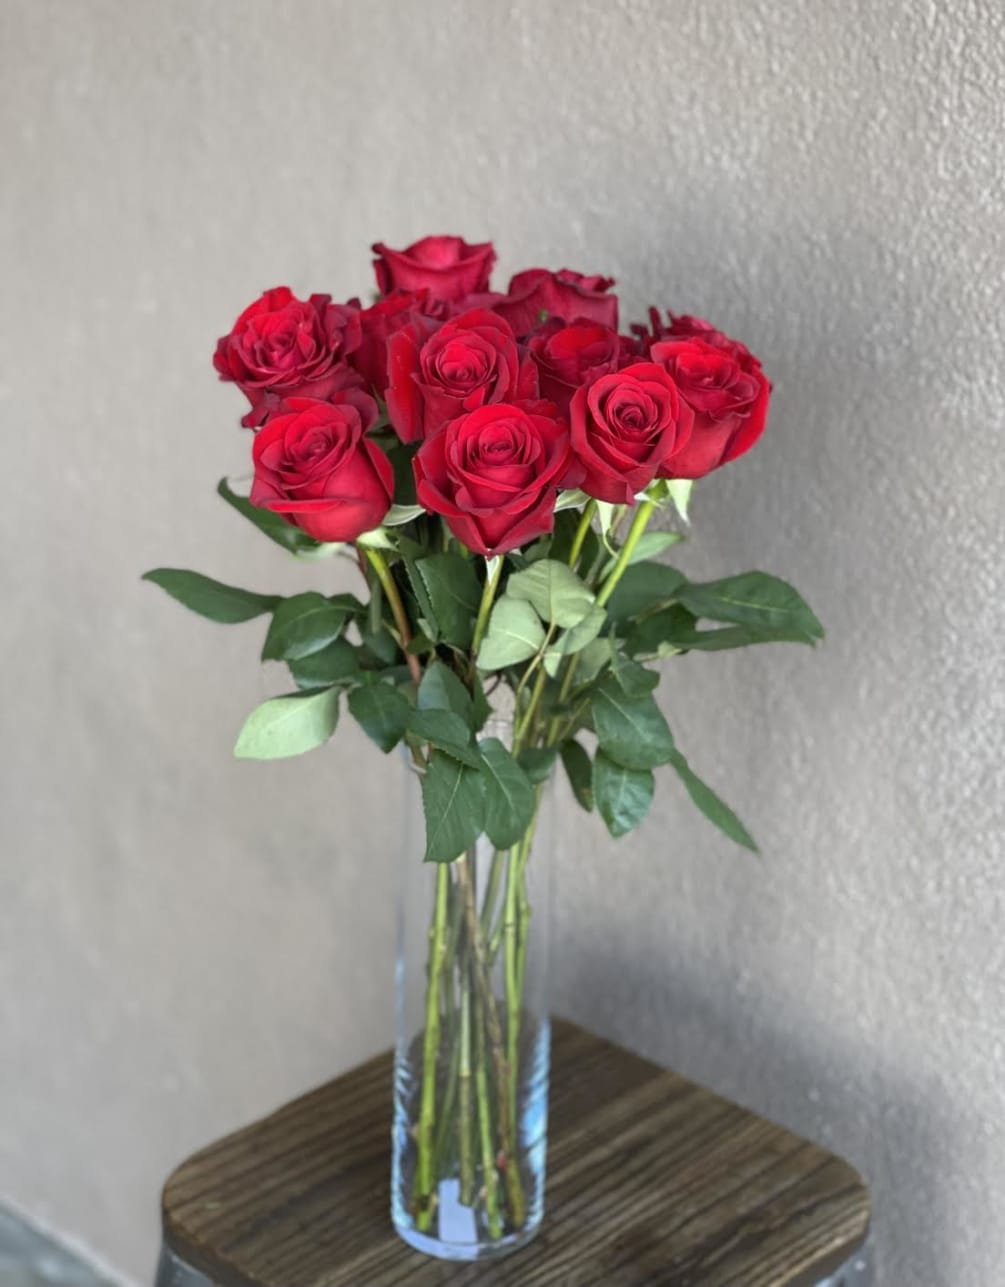 A dozen red roses in a vase make the perfect gift for